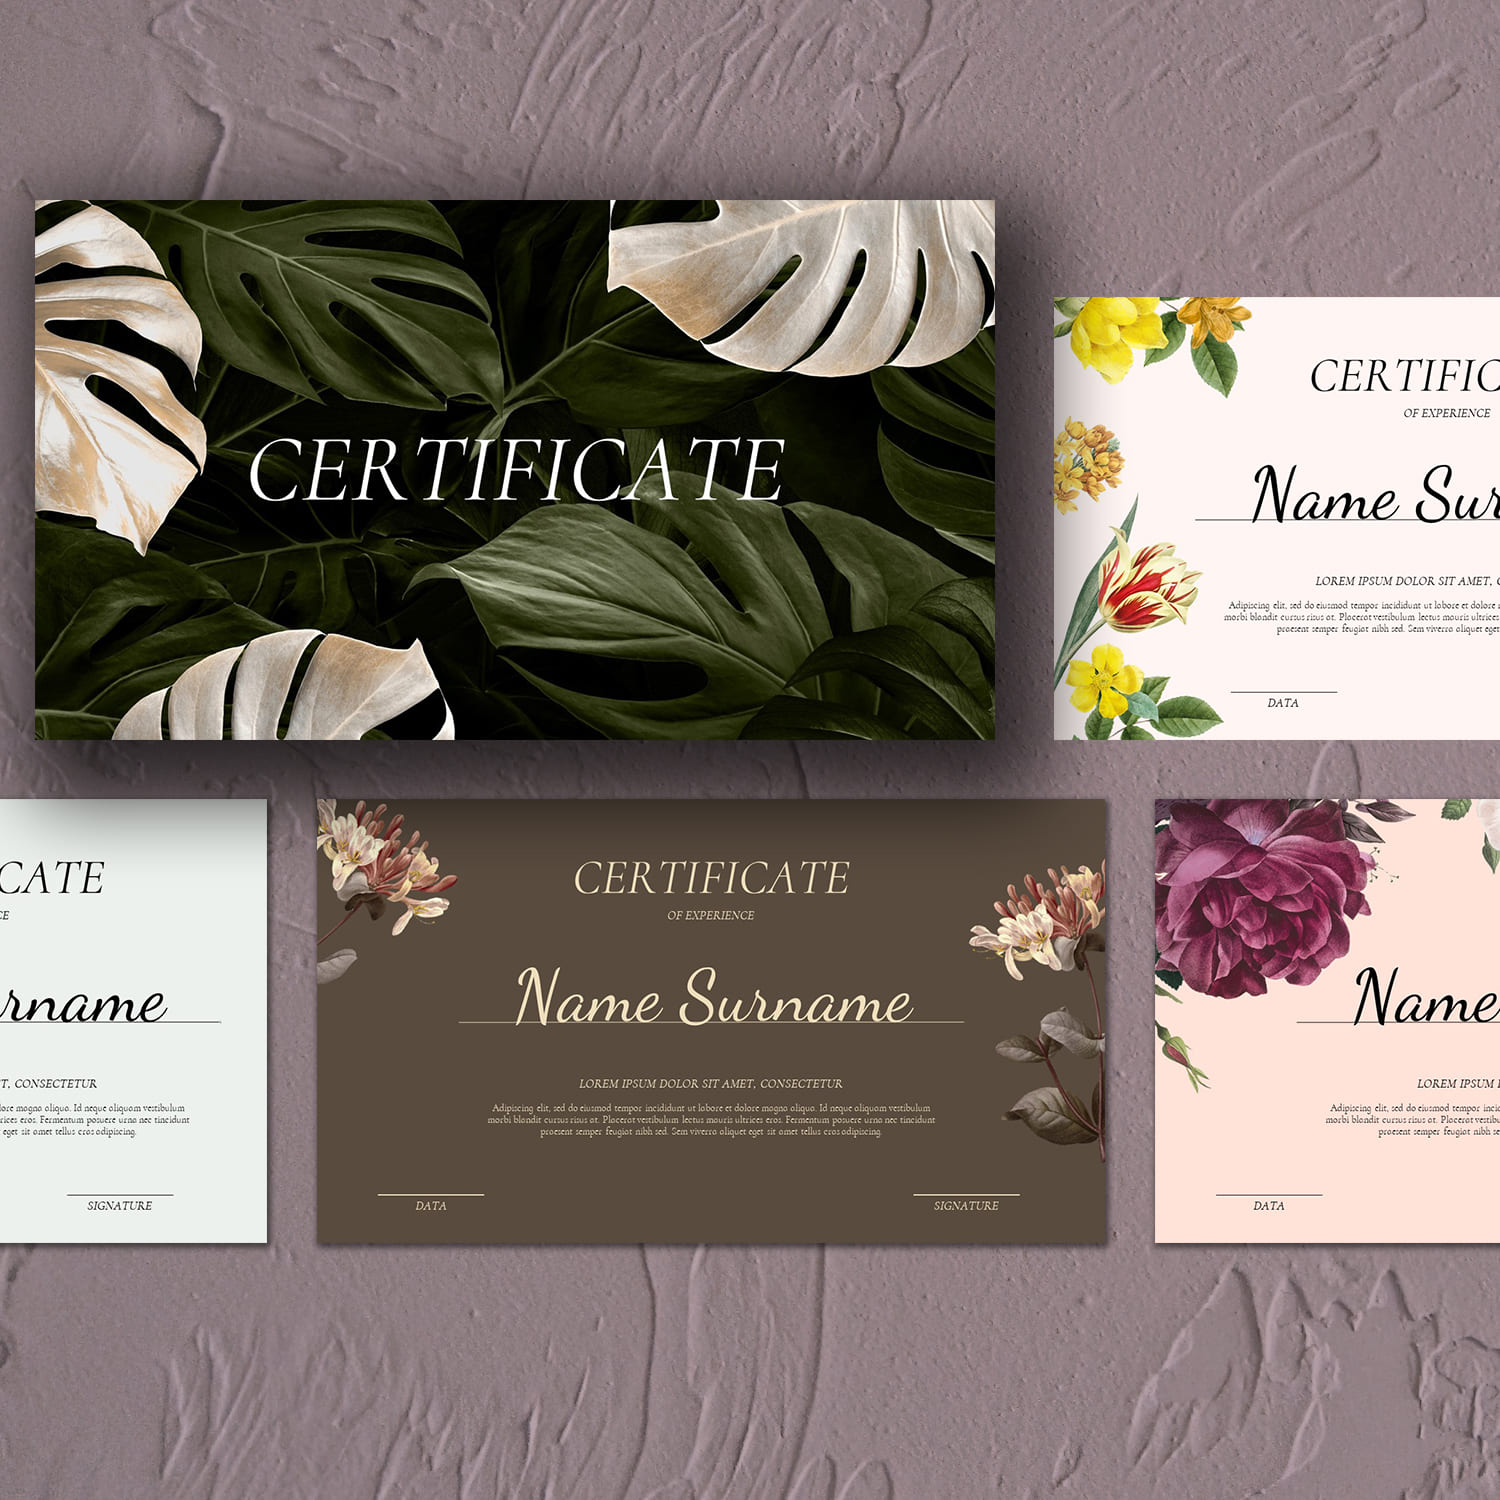 Powerpoint Certificate Template.